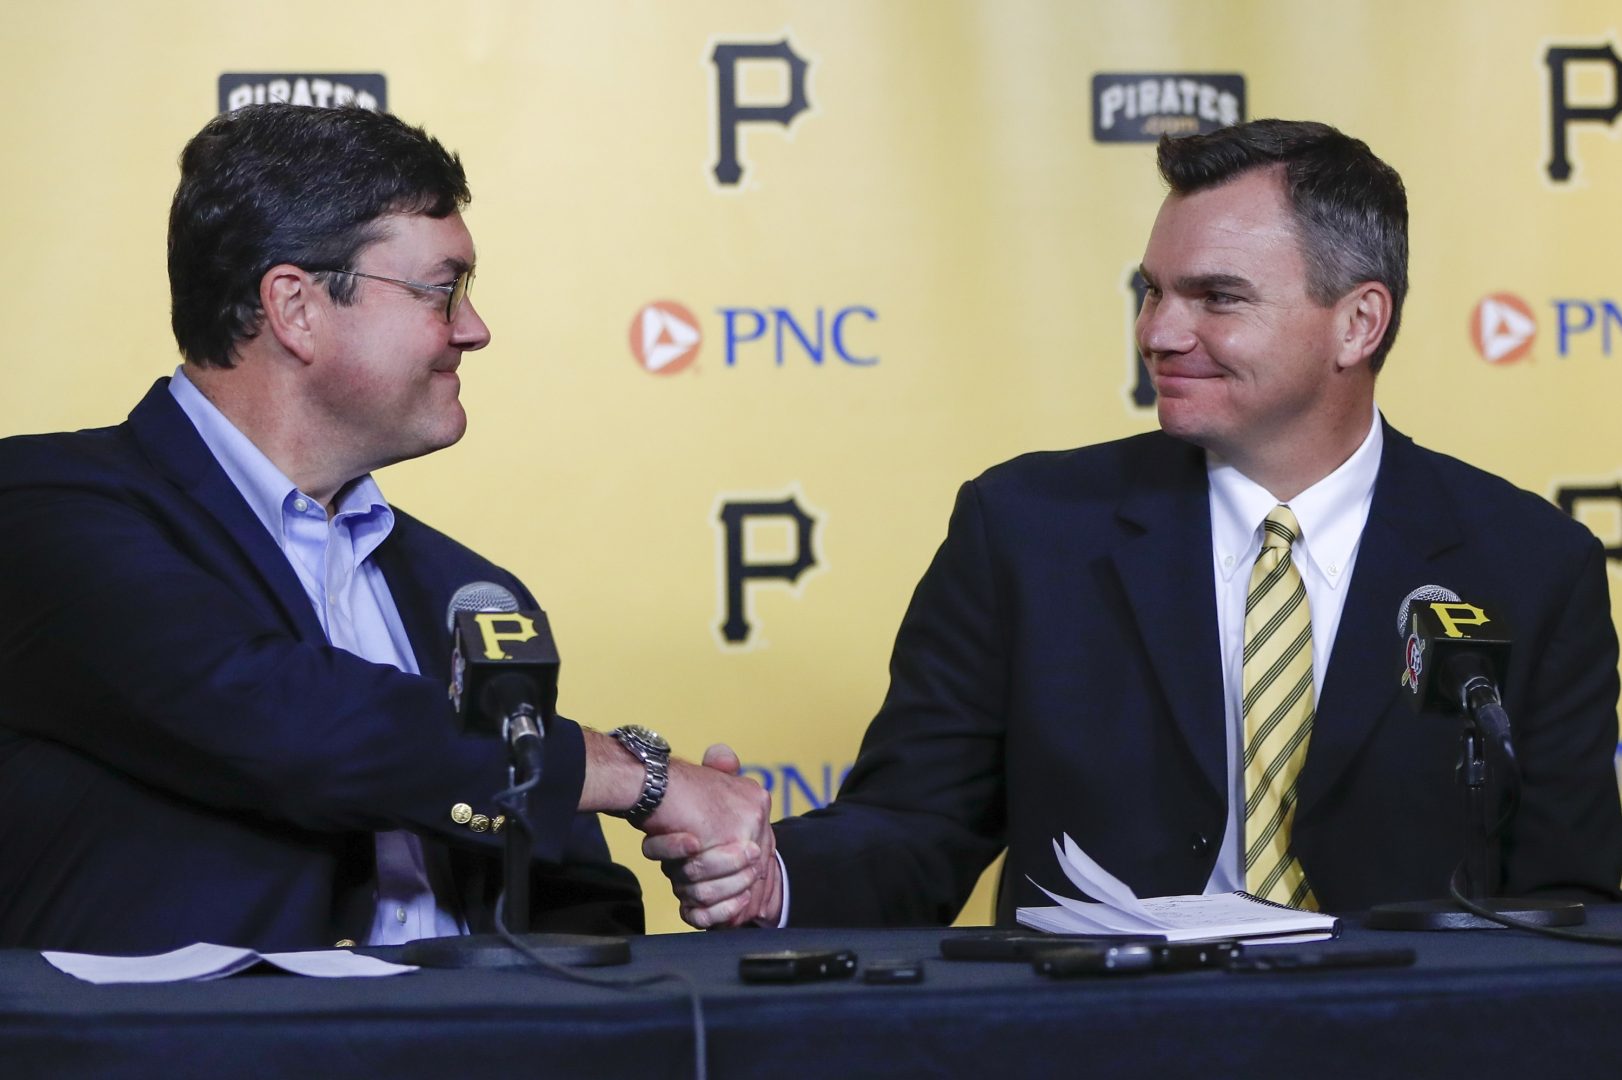 Team owner Bob Nutting, left, shakes hands with Ben Cherington during a news conference where Cherington was introduced as the new general manager of the Pittsburgh Pirates baseball team, Monday, Nov. 18, 2019, in Pittsburgh. 